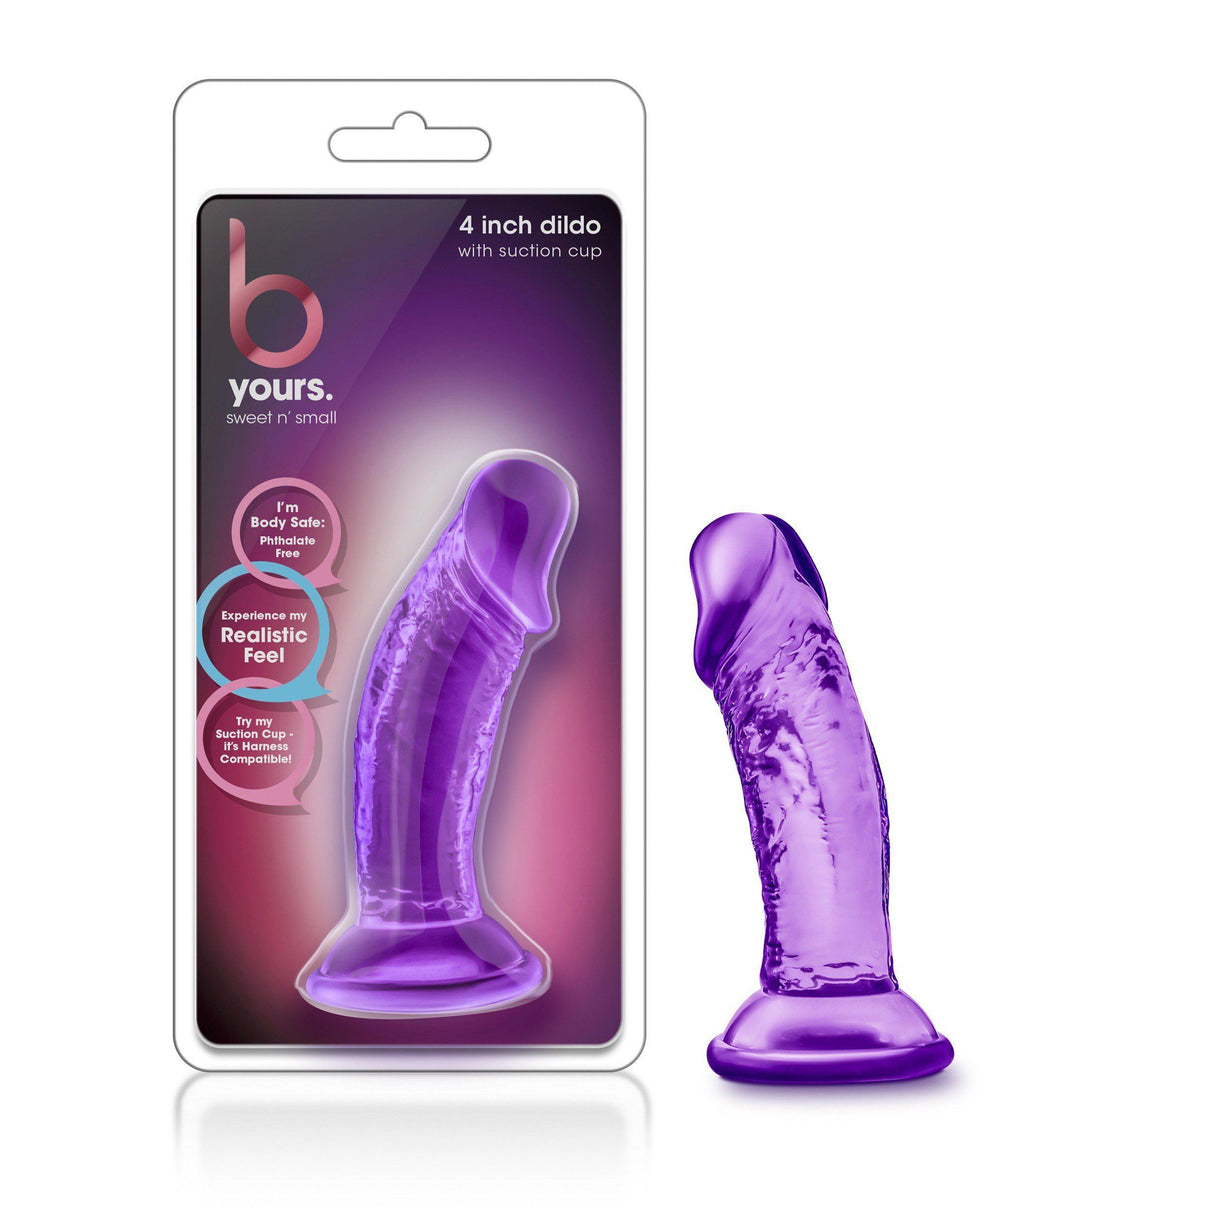 Blush B Yours Sweet N' Small 4 Inch Dildo with Suction Cup